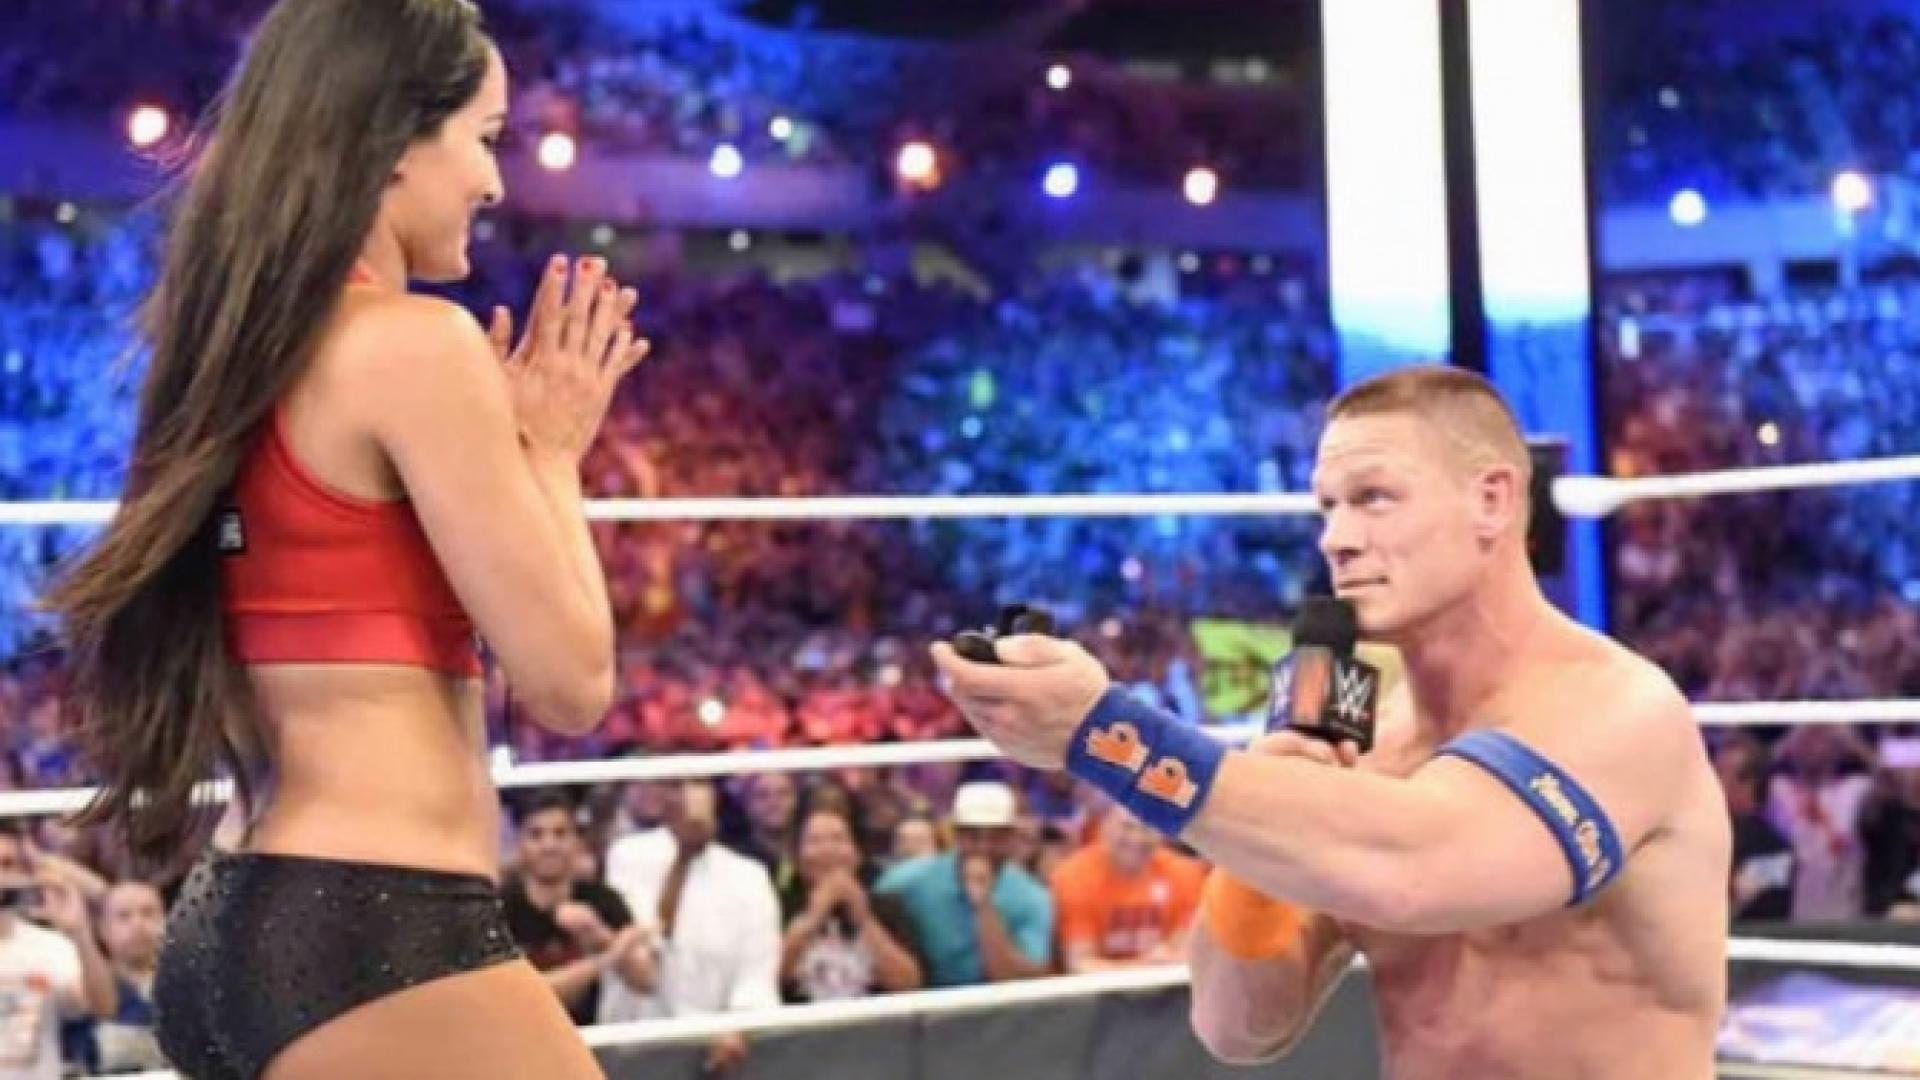 WWE Star John Cena Proposes to Girlfriend Nikki Bella in the Ring: 'I Couldn't Have Said Yes Faster'